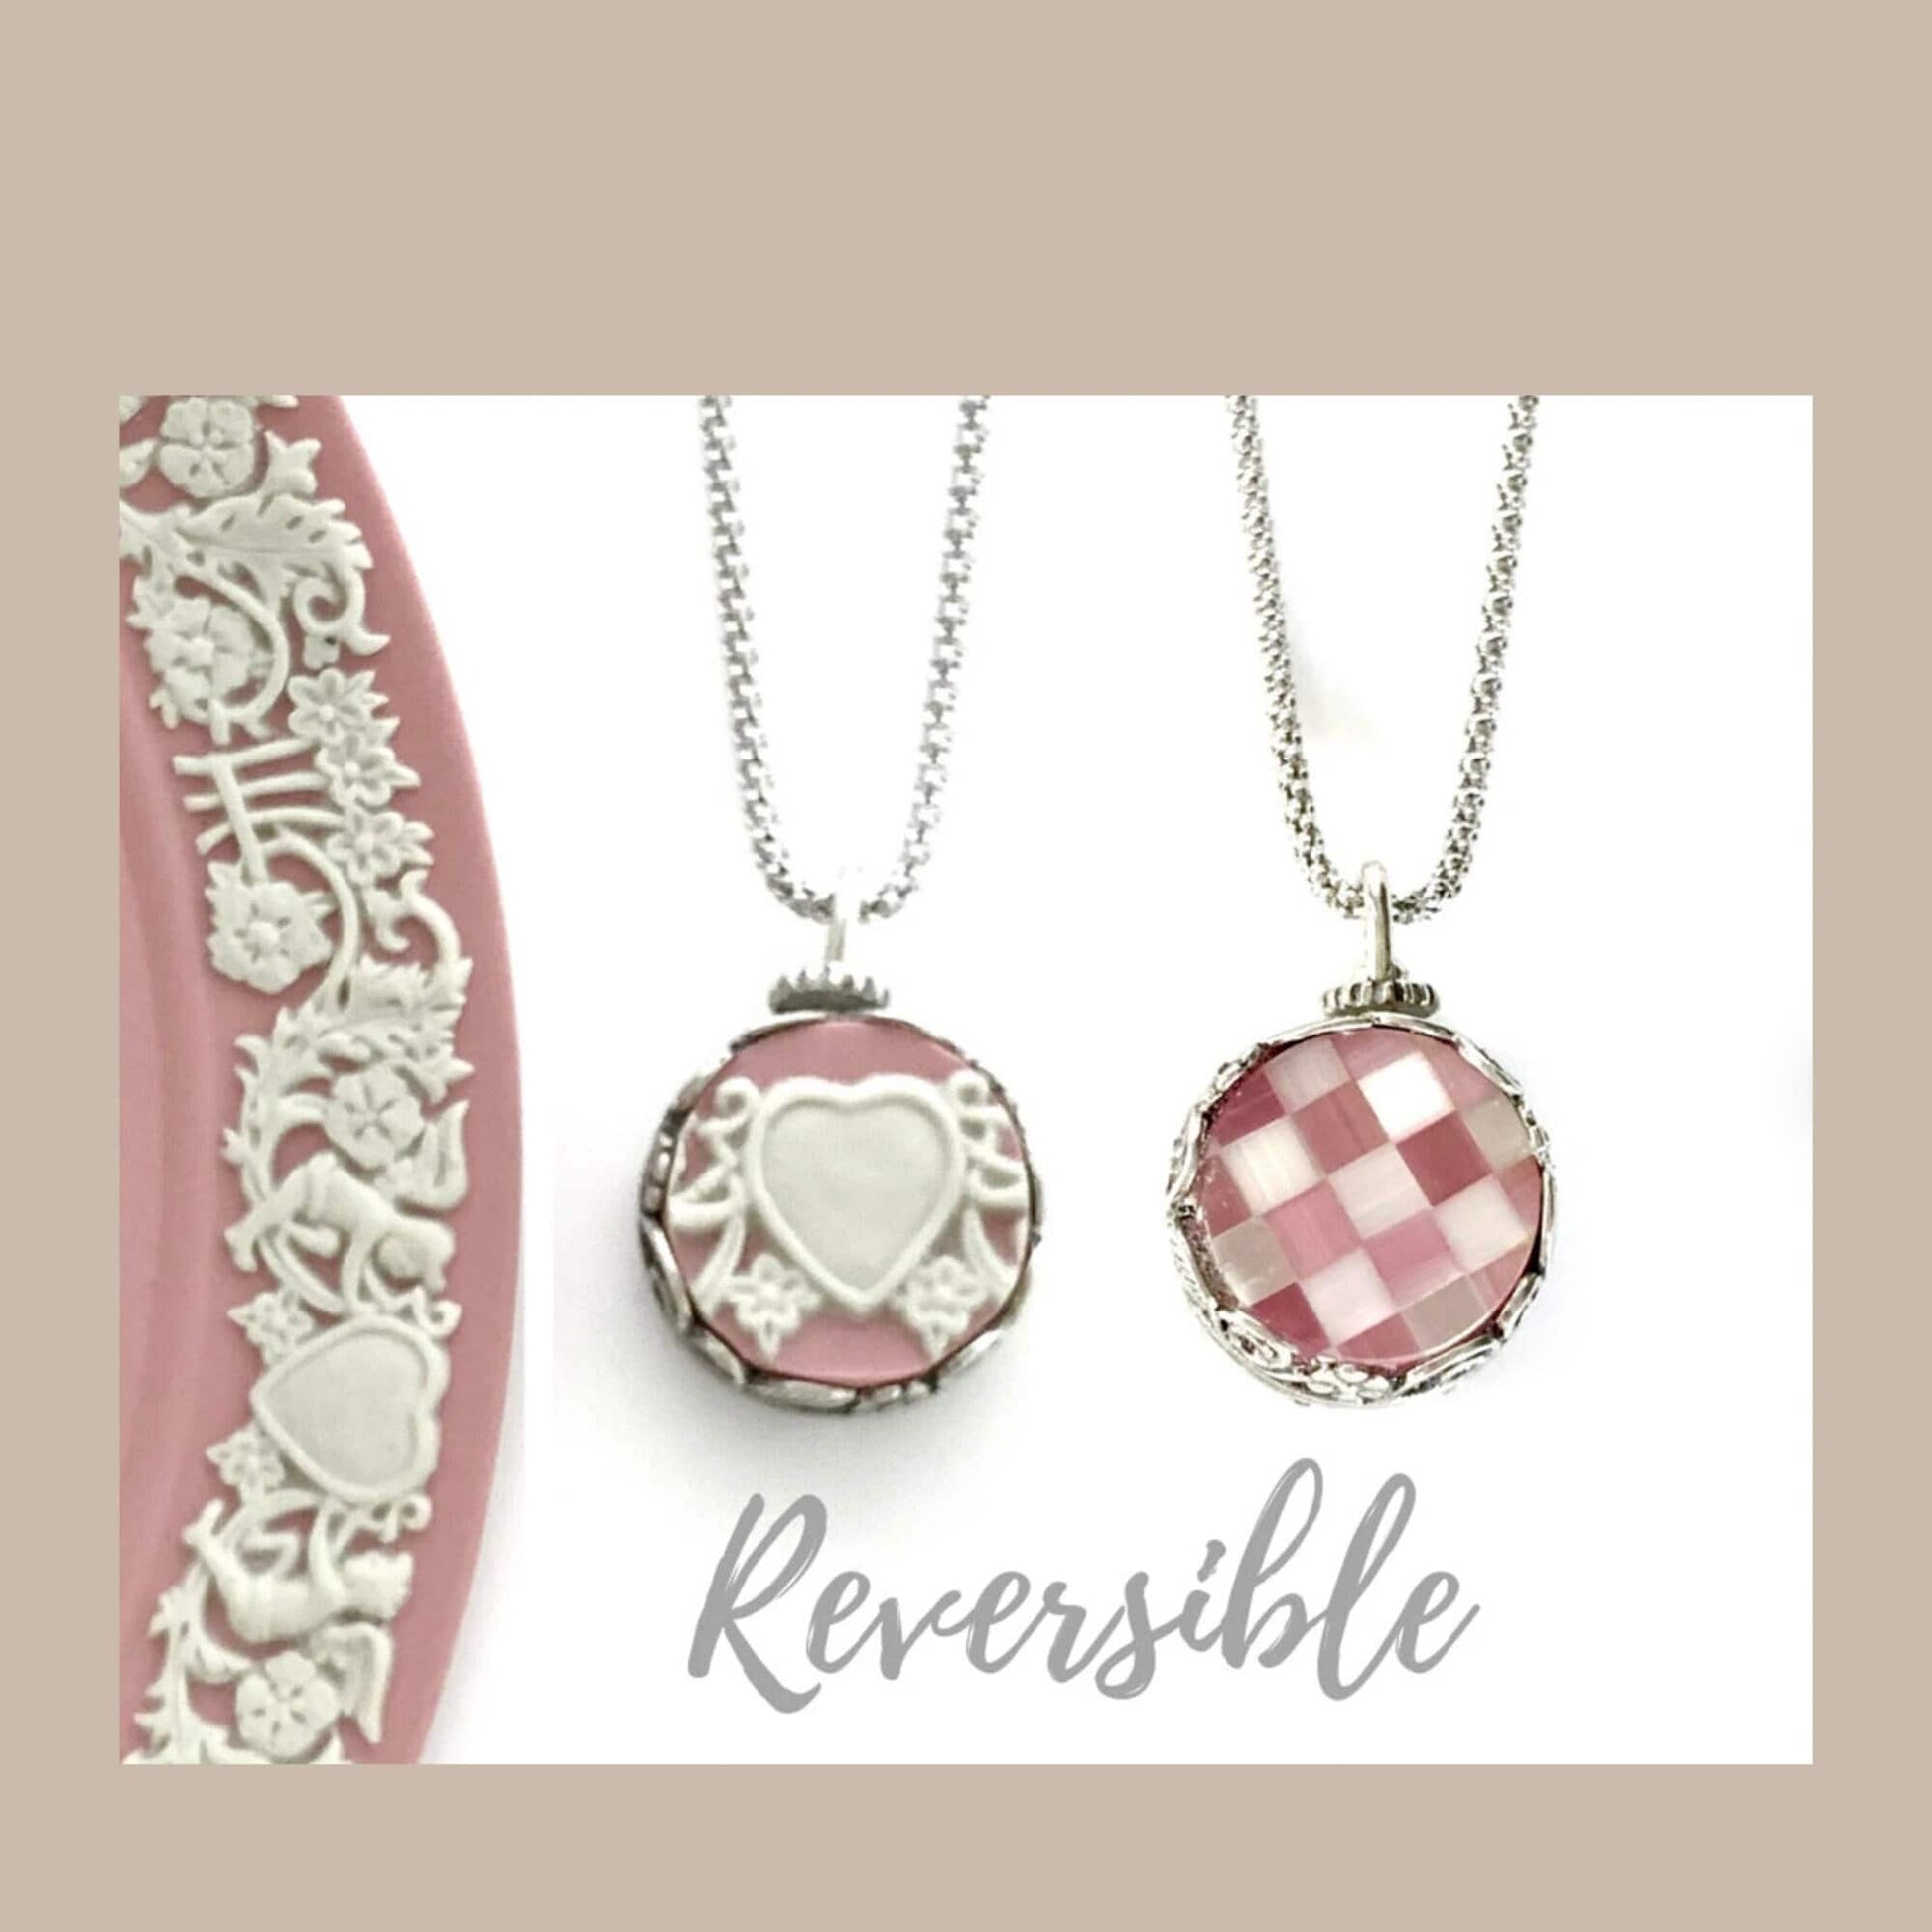 Unique Anniversary Gift for Her Necklace, Pink Wedgwood, Mother of Pearl, Broken China Jewelry Heart Necklace